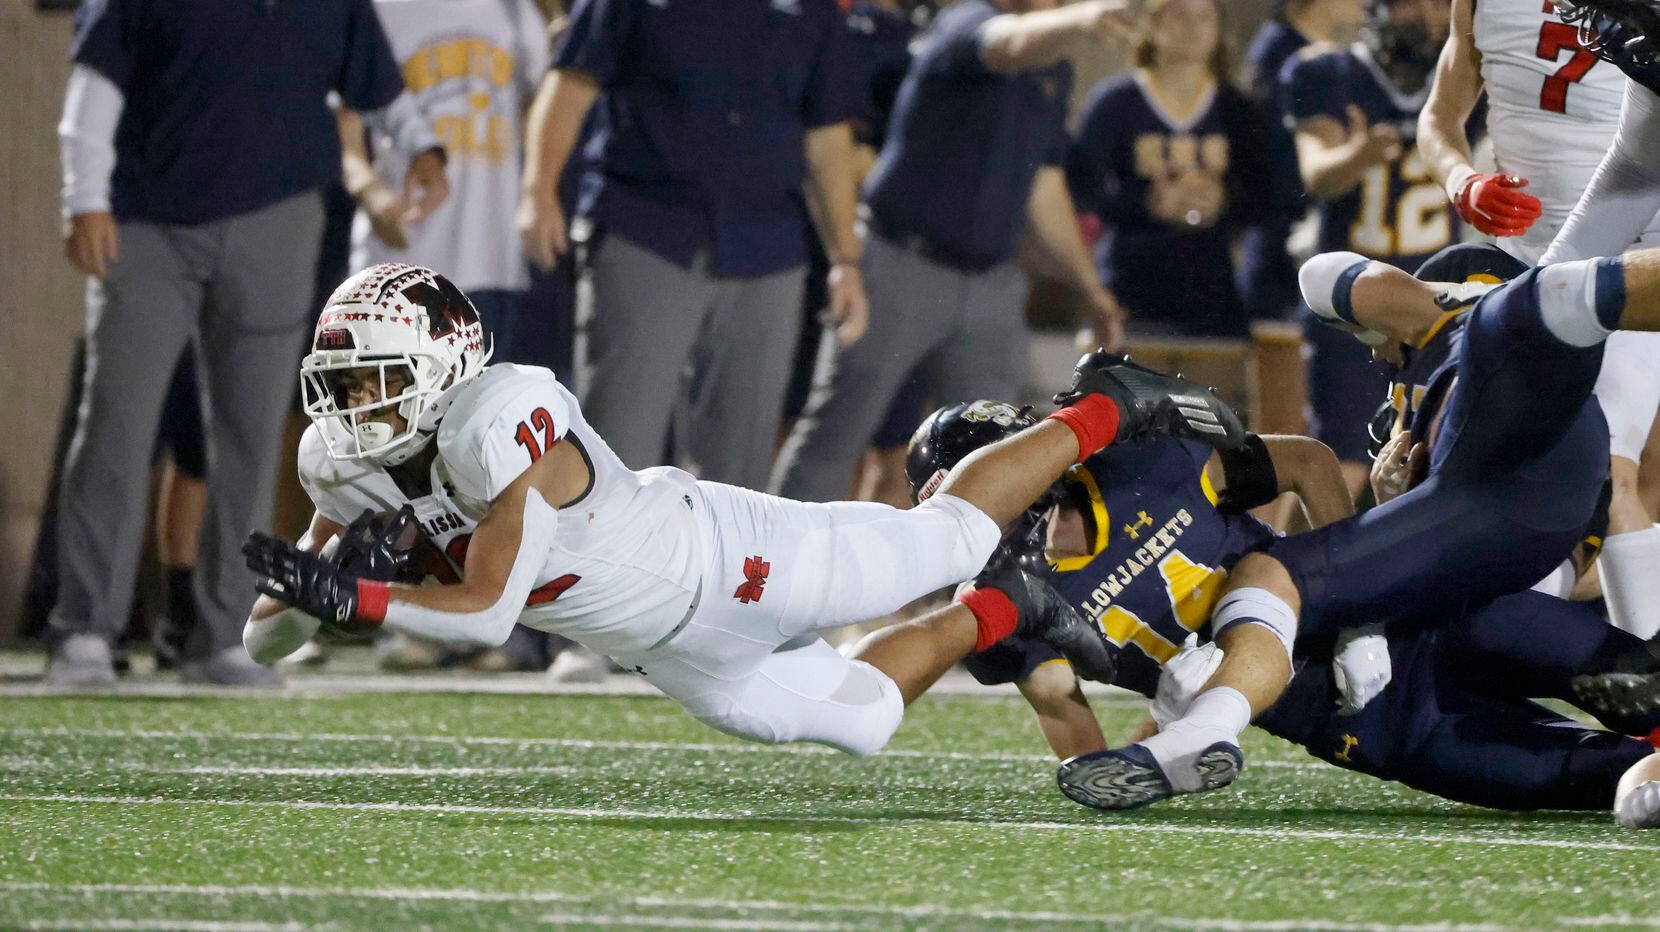 Melissa’s Ashton Mitchell Johnson (12) dives for extra yardage as he is tackled by Stephenville’s Hyson Foreman(14) during the first half of a Class 4A Division I Region II final high school football game in Bedford, Texas on Friday, Dec. 3, 2021. (Michael Ainsworth/Special Contributor)